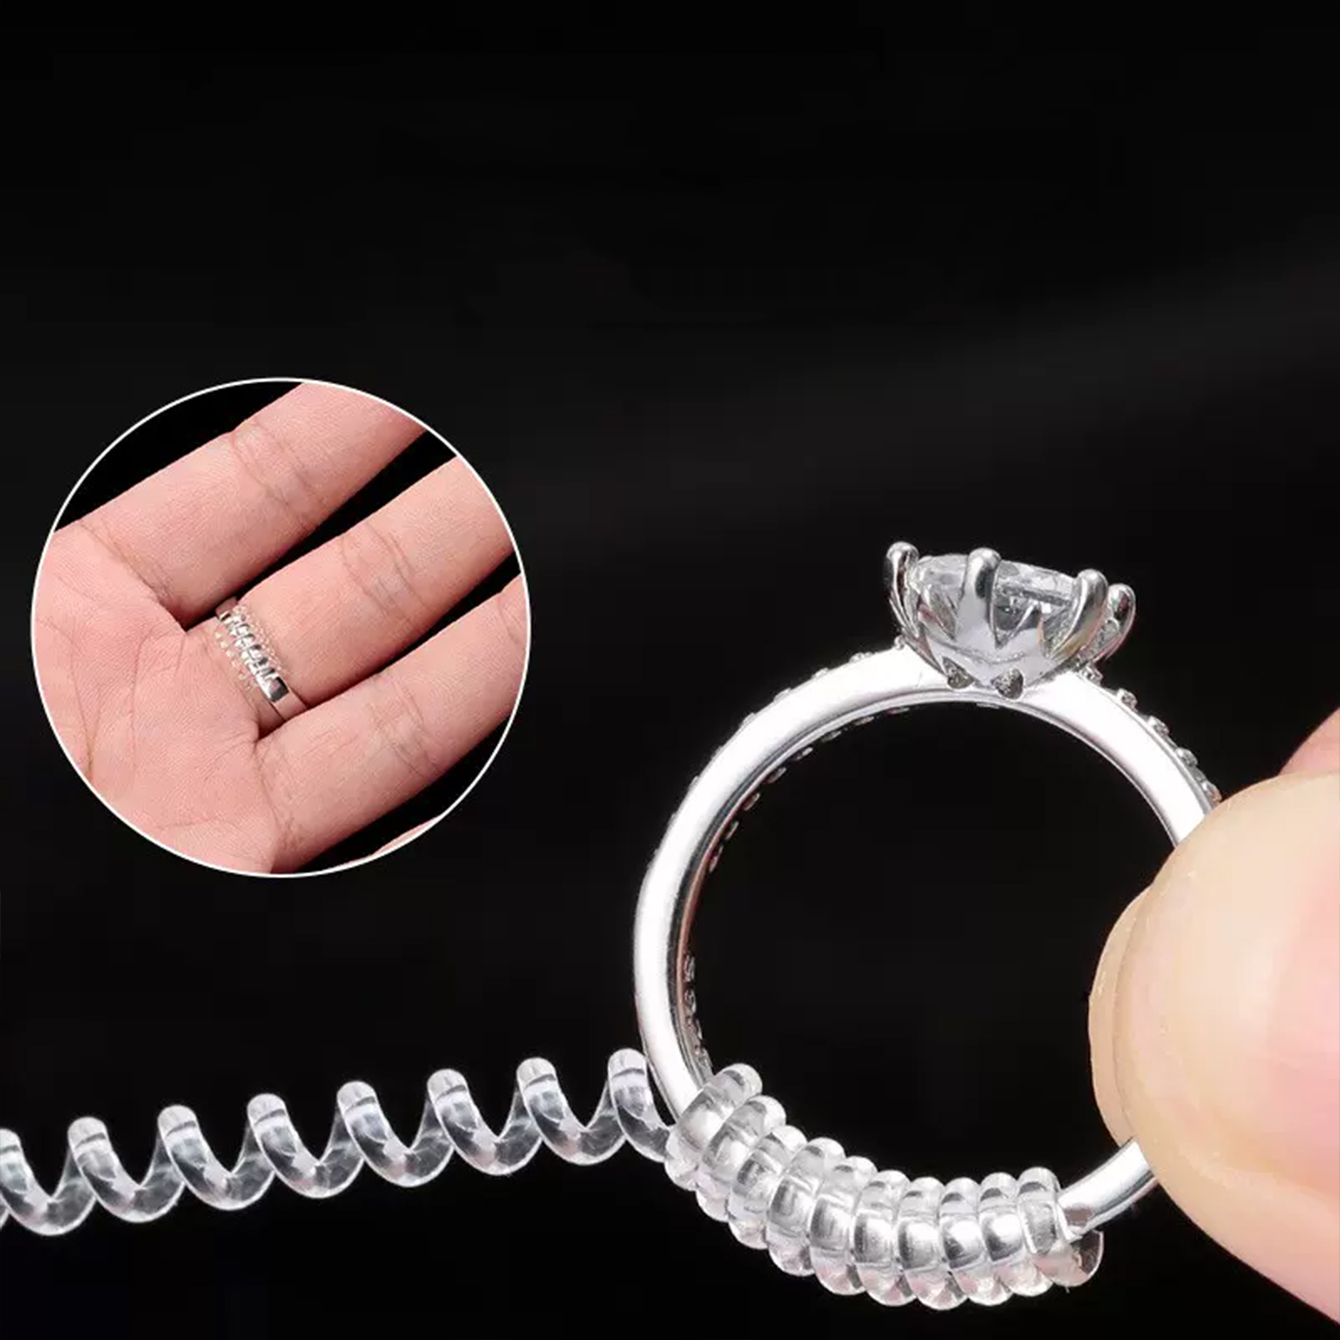 RING NOODLE 3 Pack Ring Size Reducer Ring Guard Ring - Etsy